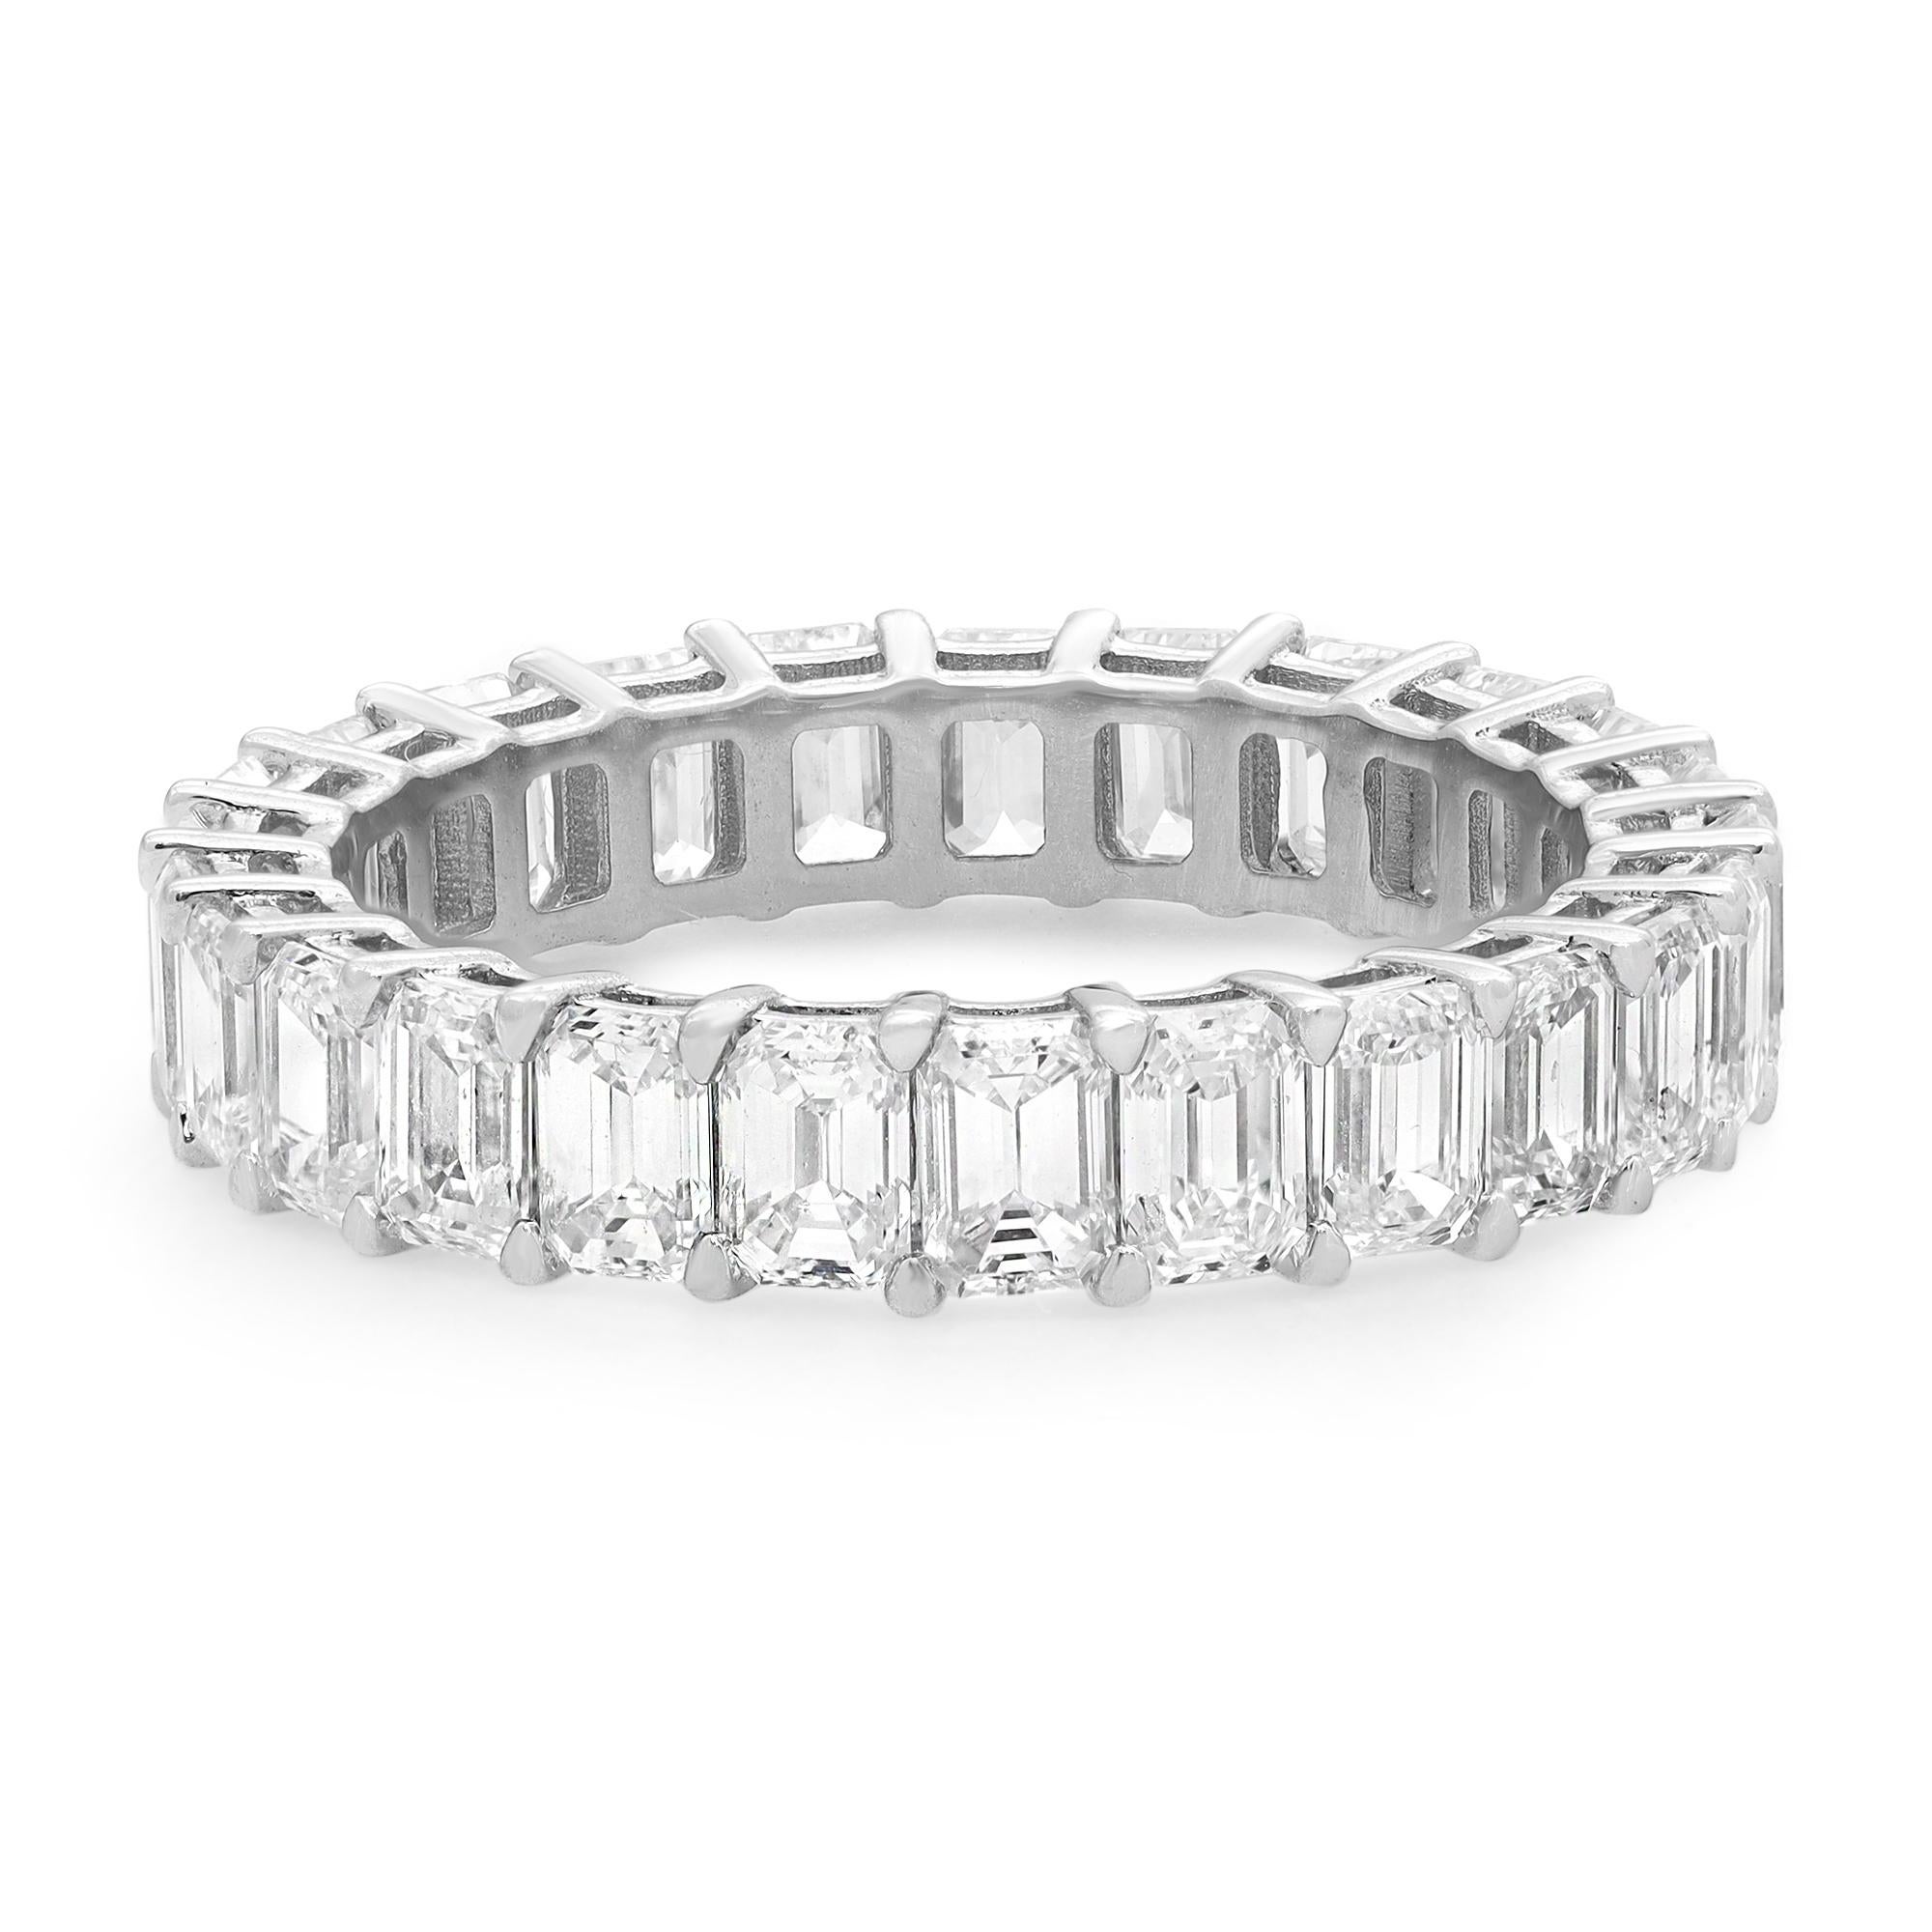 This classic diamond eternity ring makes a standout addition to your jewelry collection. It features 25 prong set Emerald cut sparkling diamonds, crafted in an 18k white gold band. Total diamond weight: 3.71carats. Diamond quality: color G-H clarity